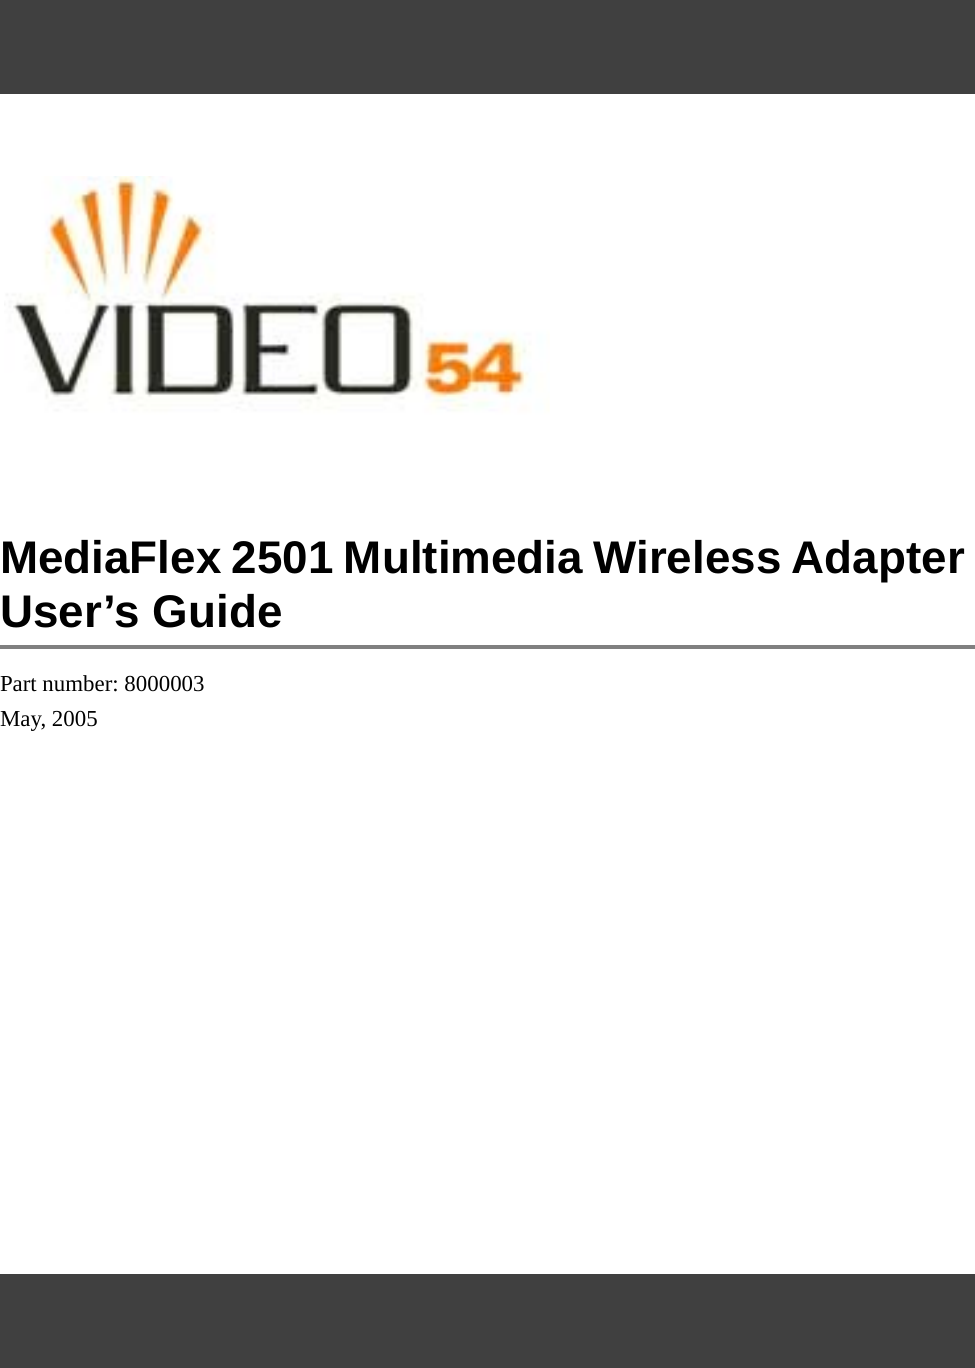 MediaFlex 2501 Multimedia Wireless Adapter User’s GuidePart number: 8000003May, 2005